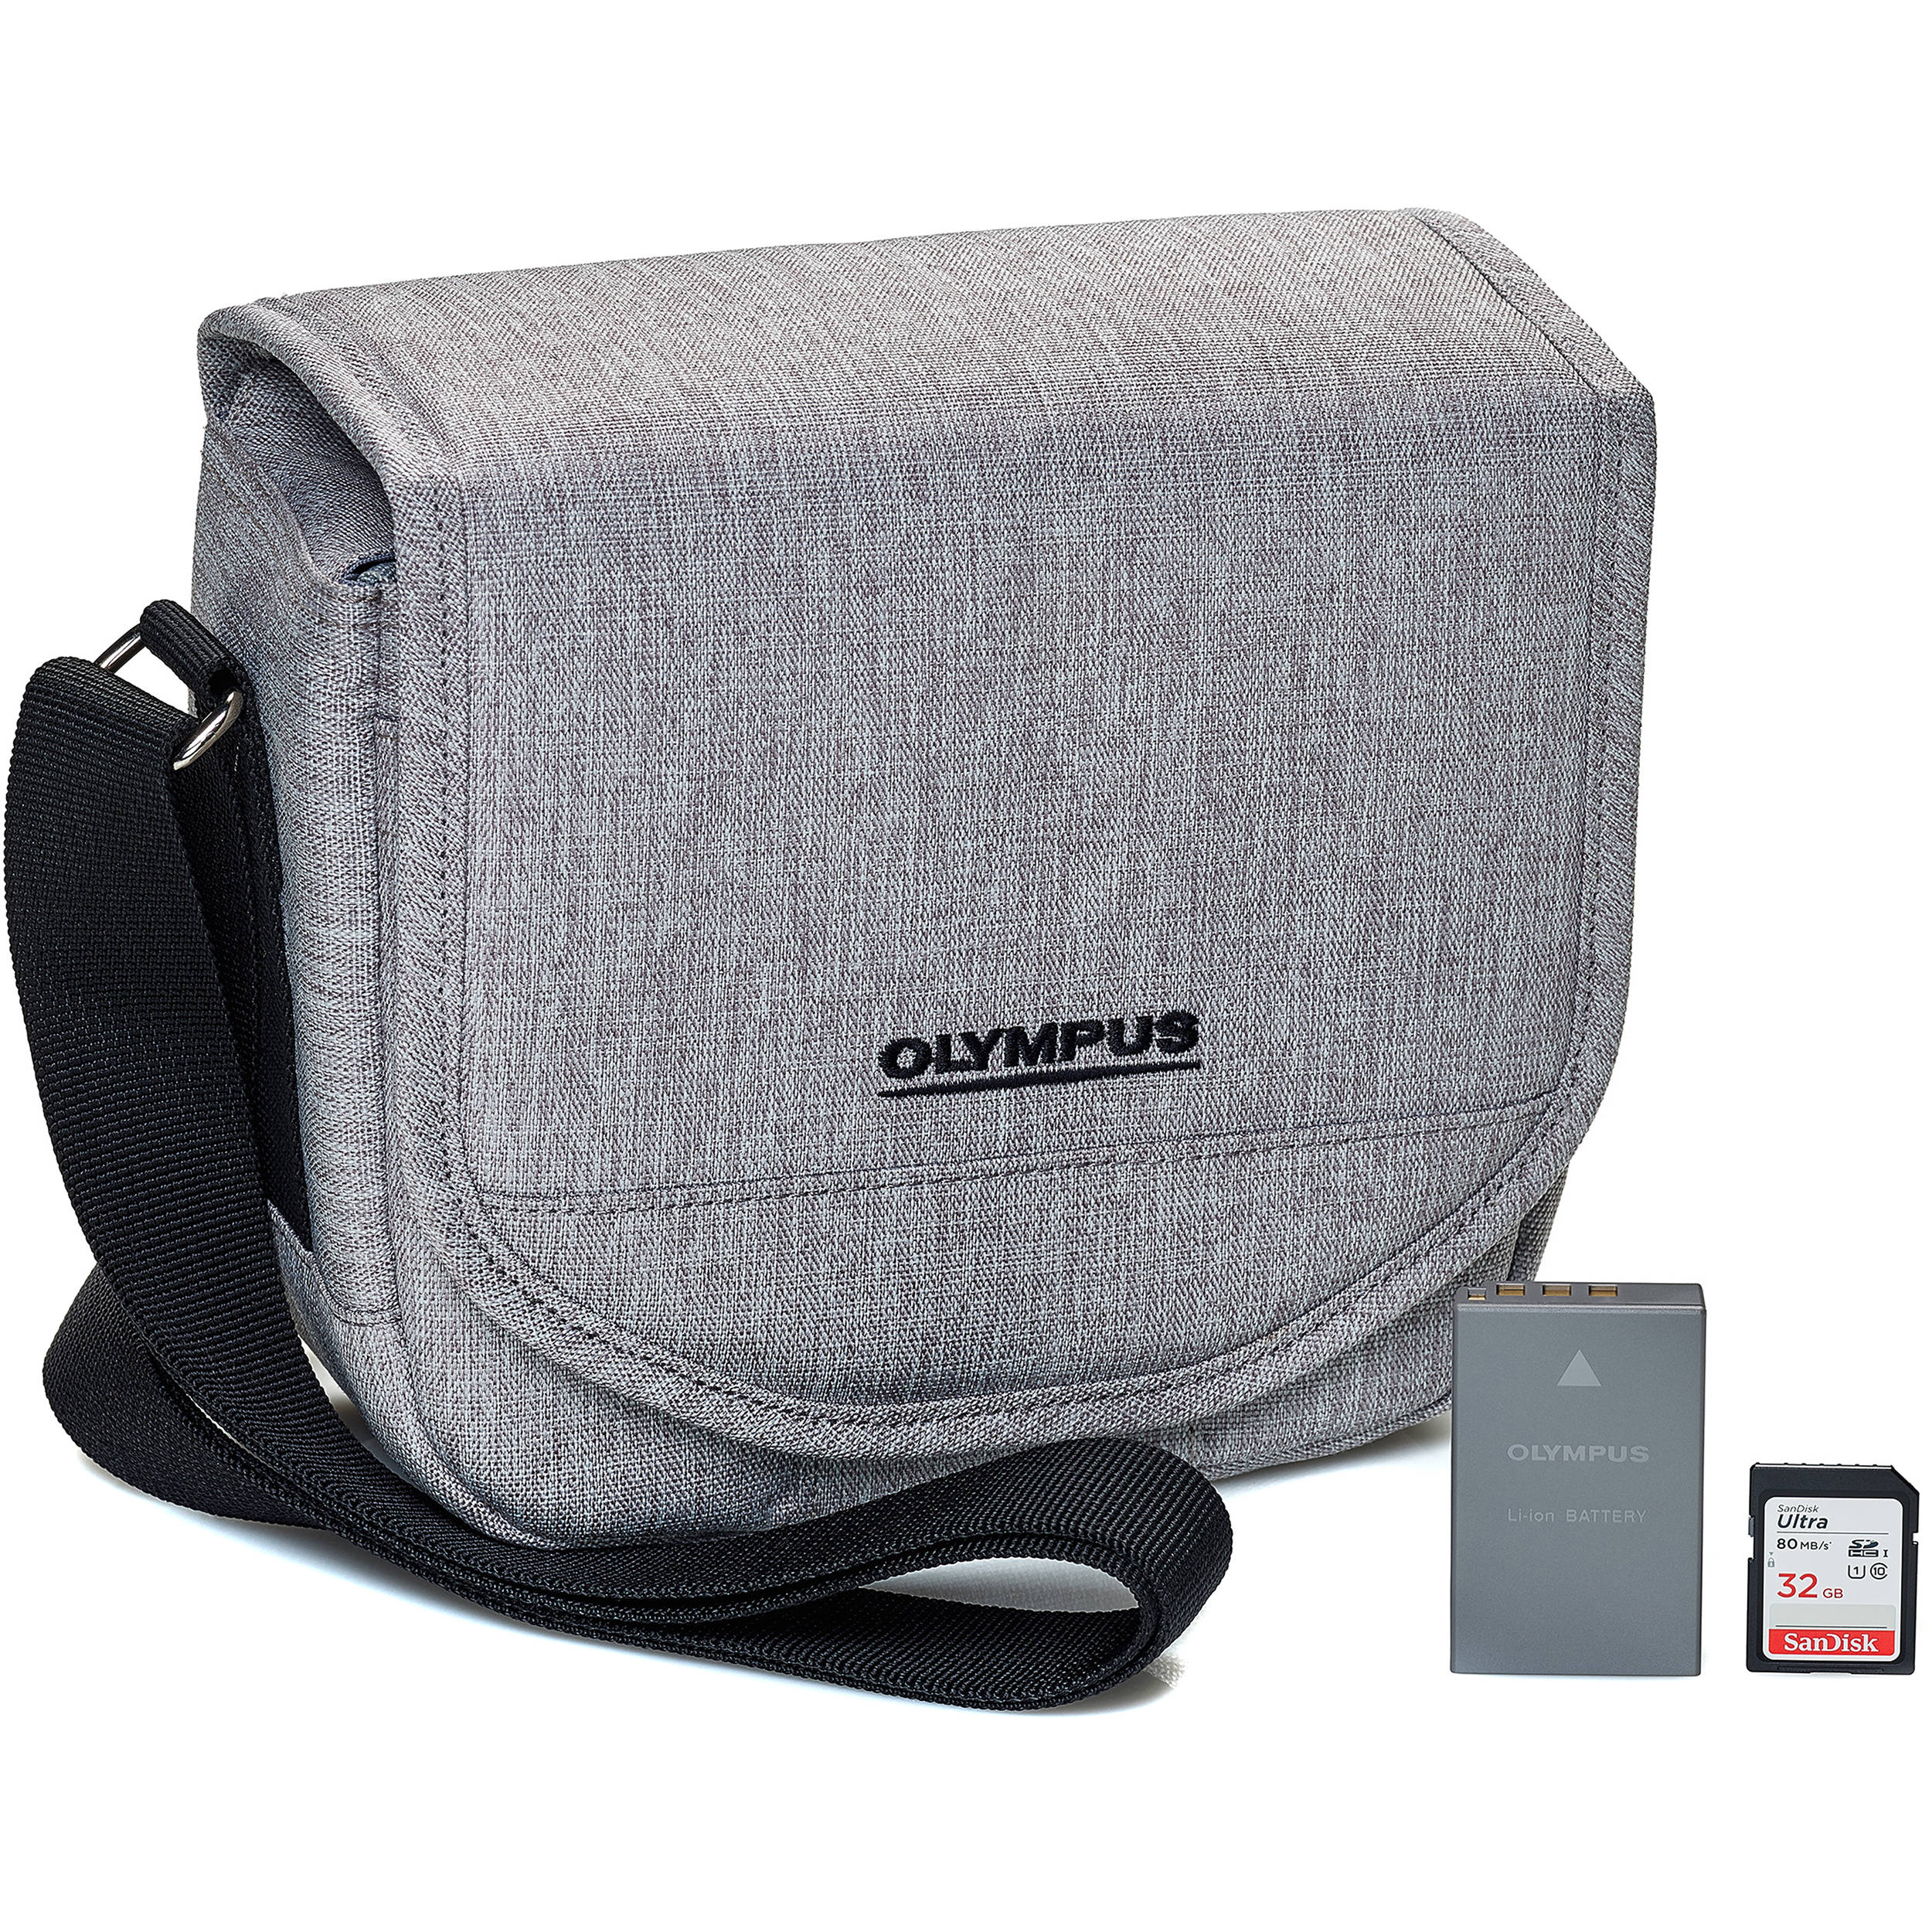 Olympus Starter Kit With Bls 50 Battery Bag And Vu010